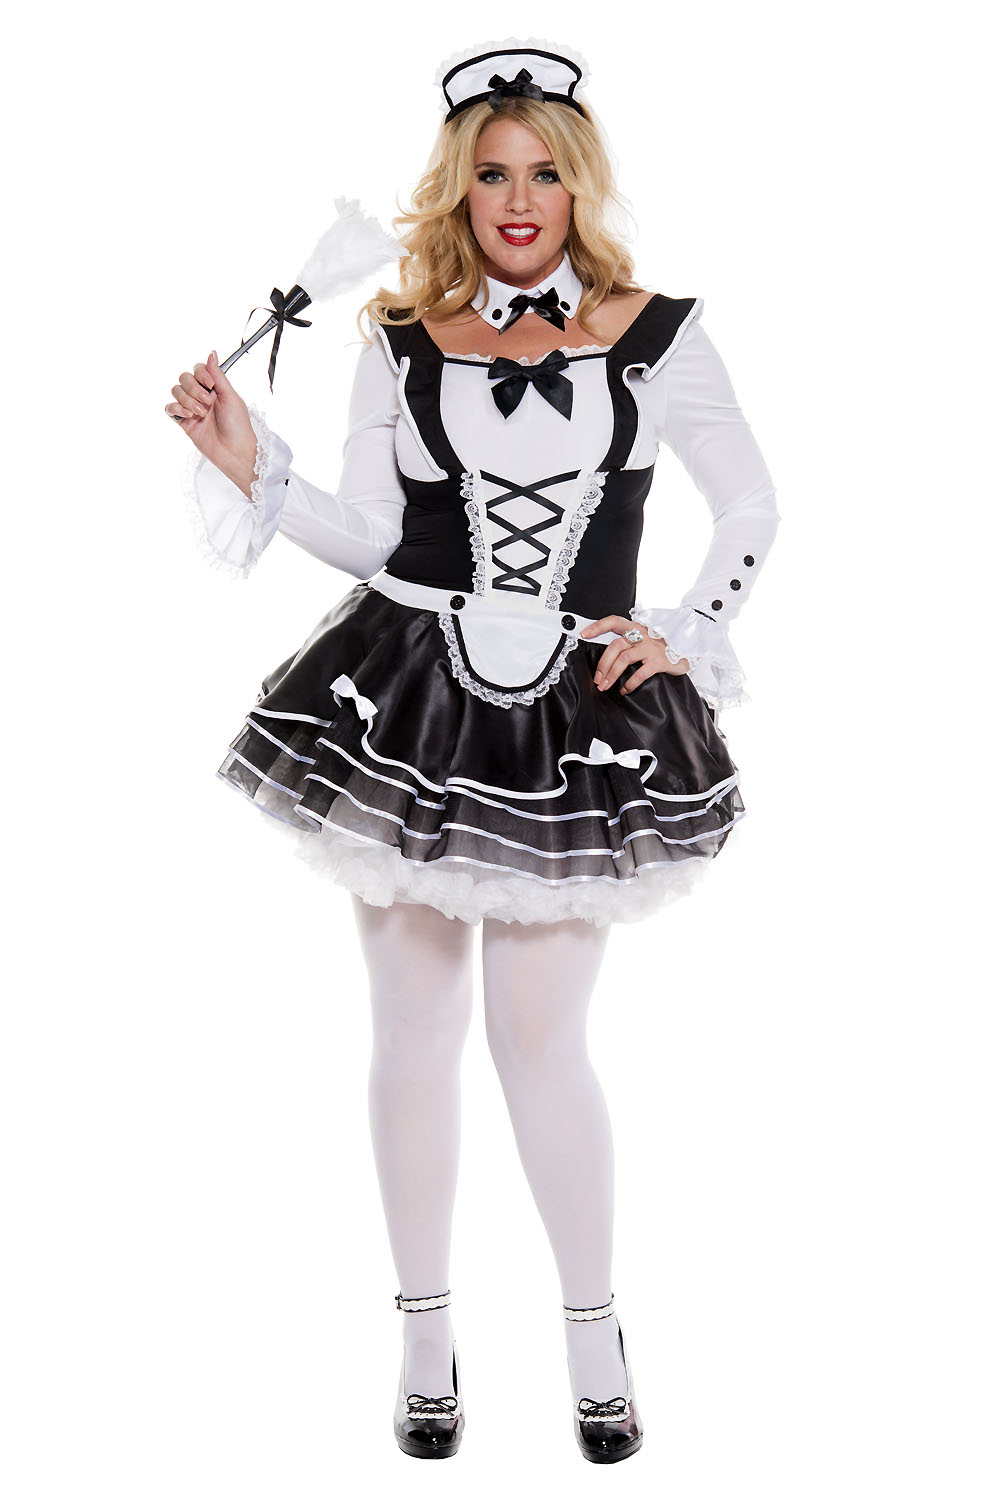 Adult Proper French Maid Plus Size Woman Costume 60 99 The Costume